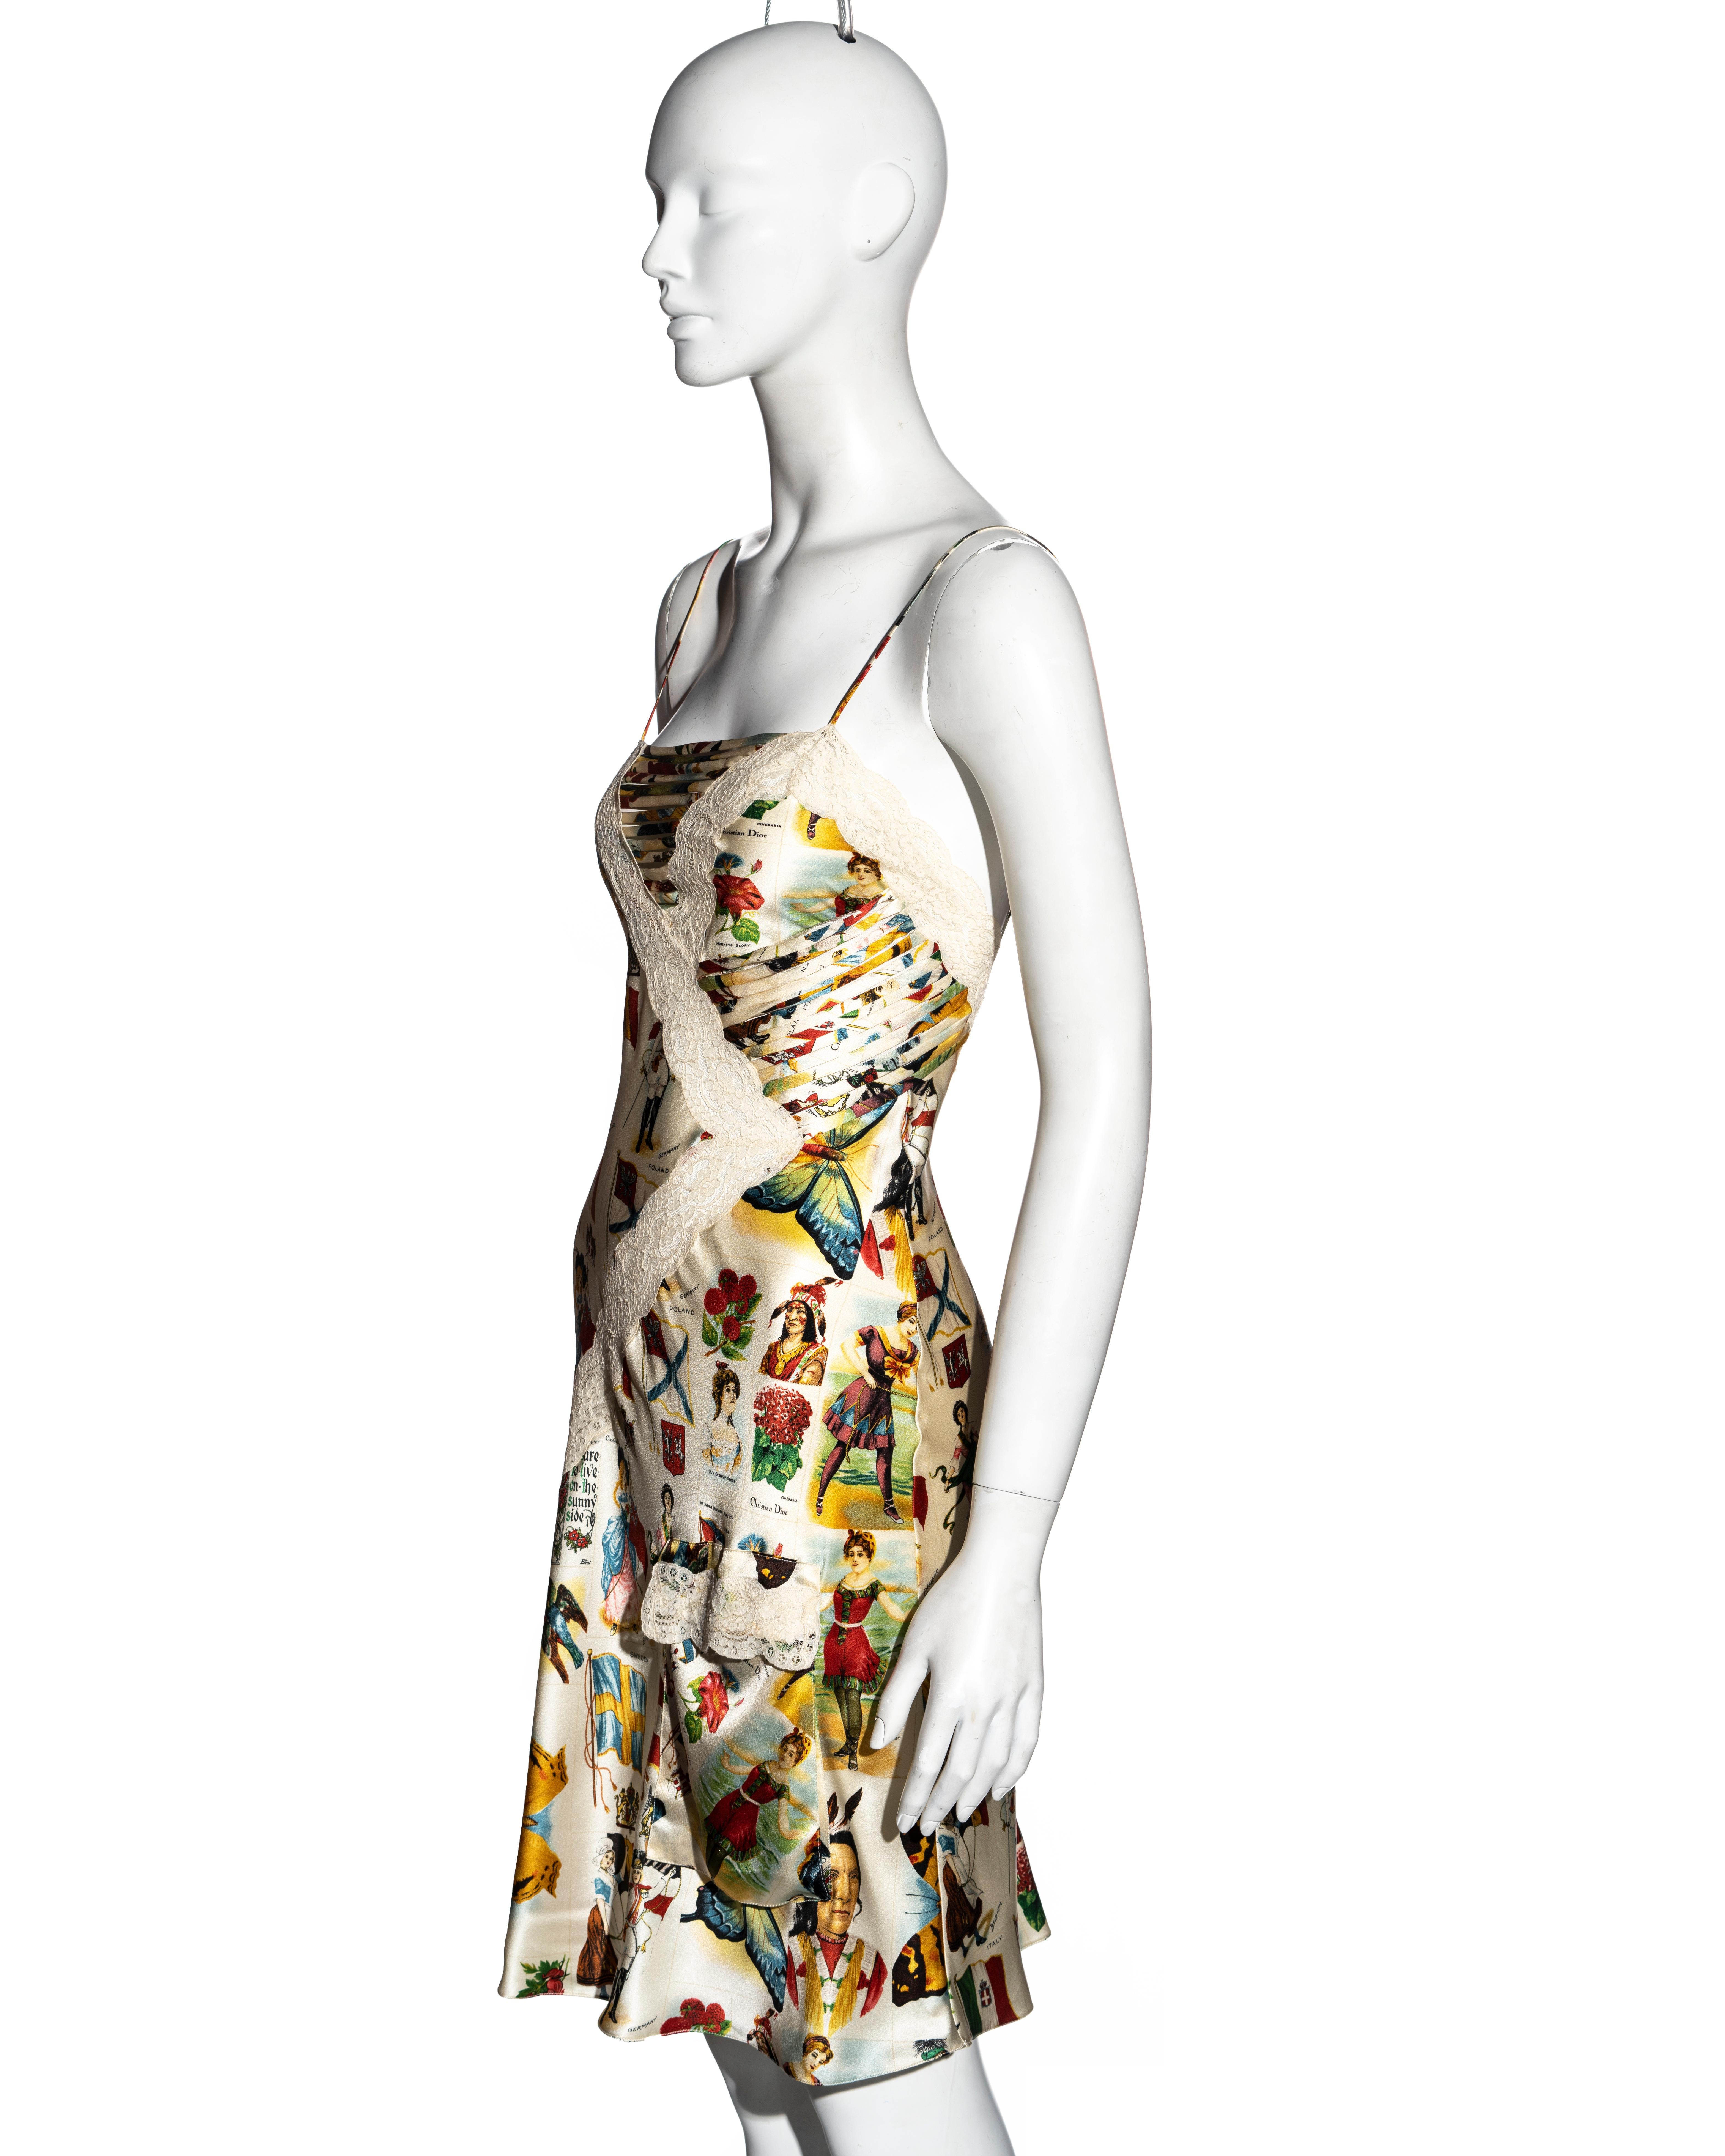 Women's Christian Dior by John Galliano stamp print silk and lace slip dress, ss 2002